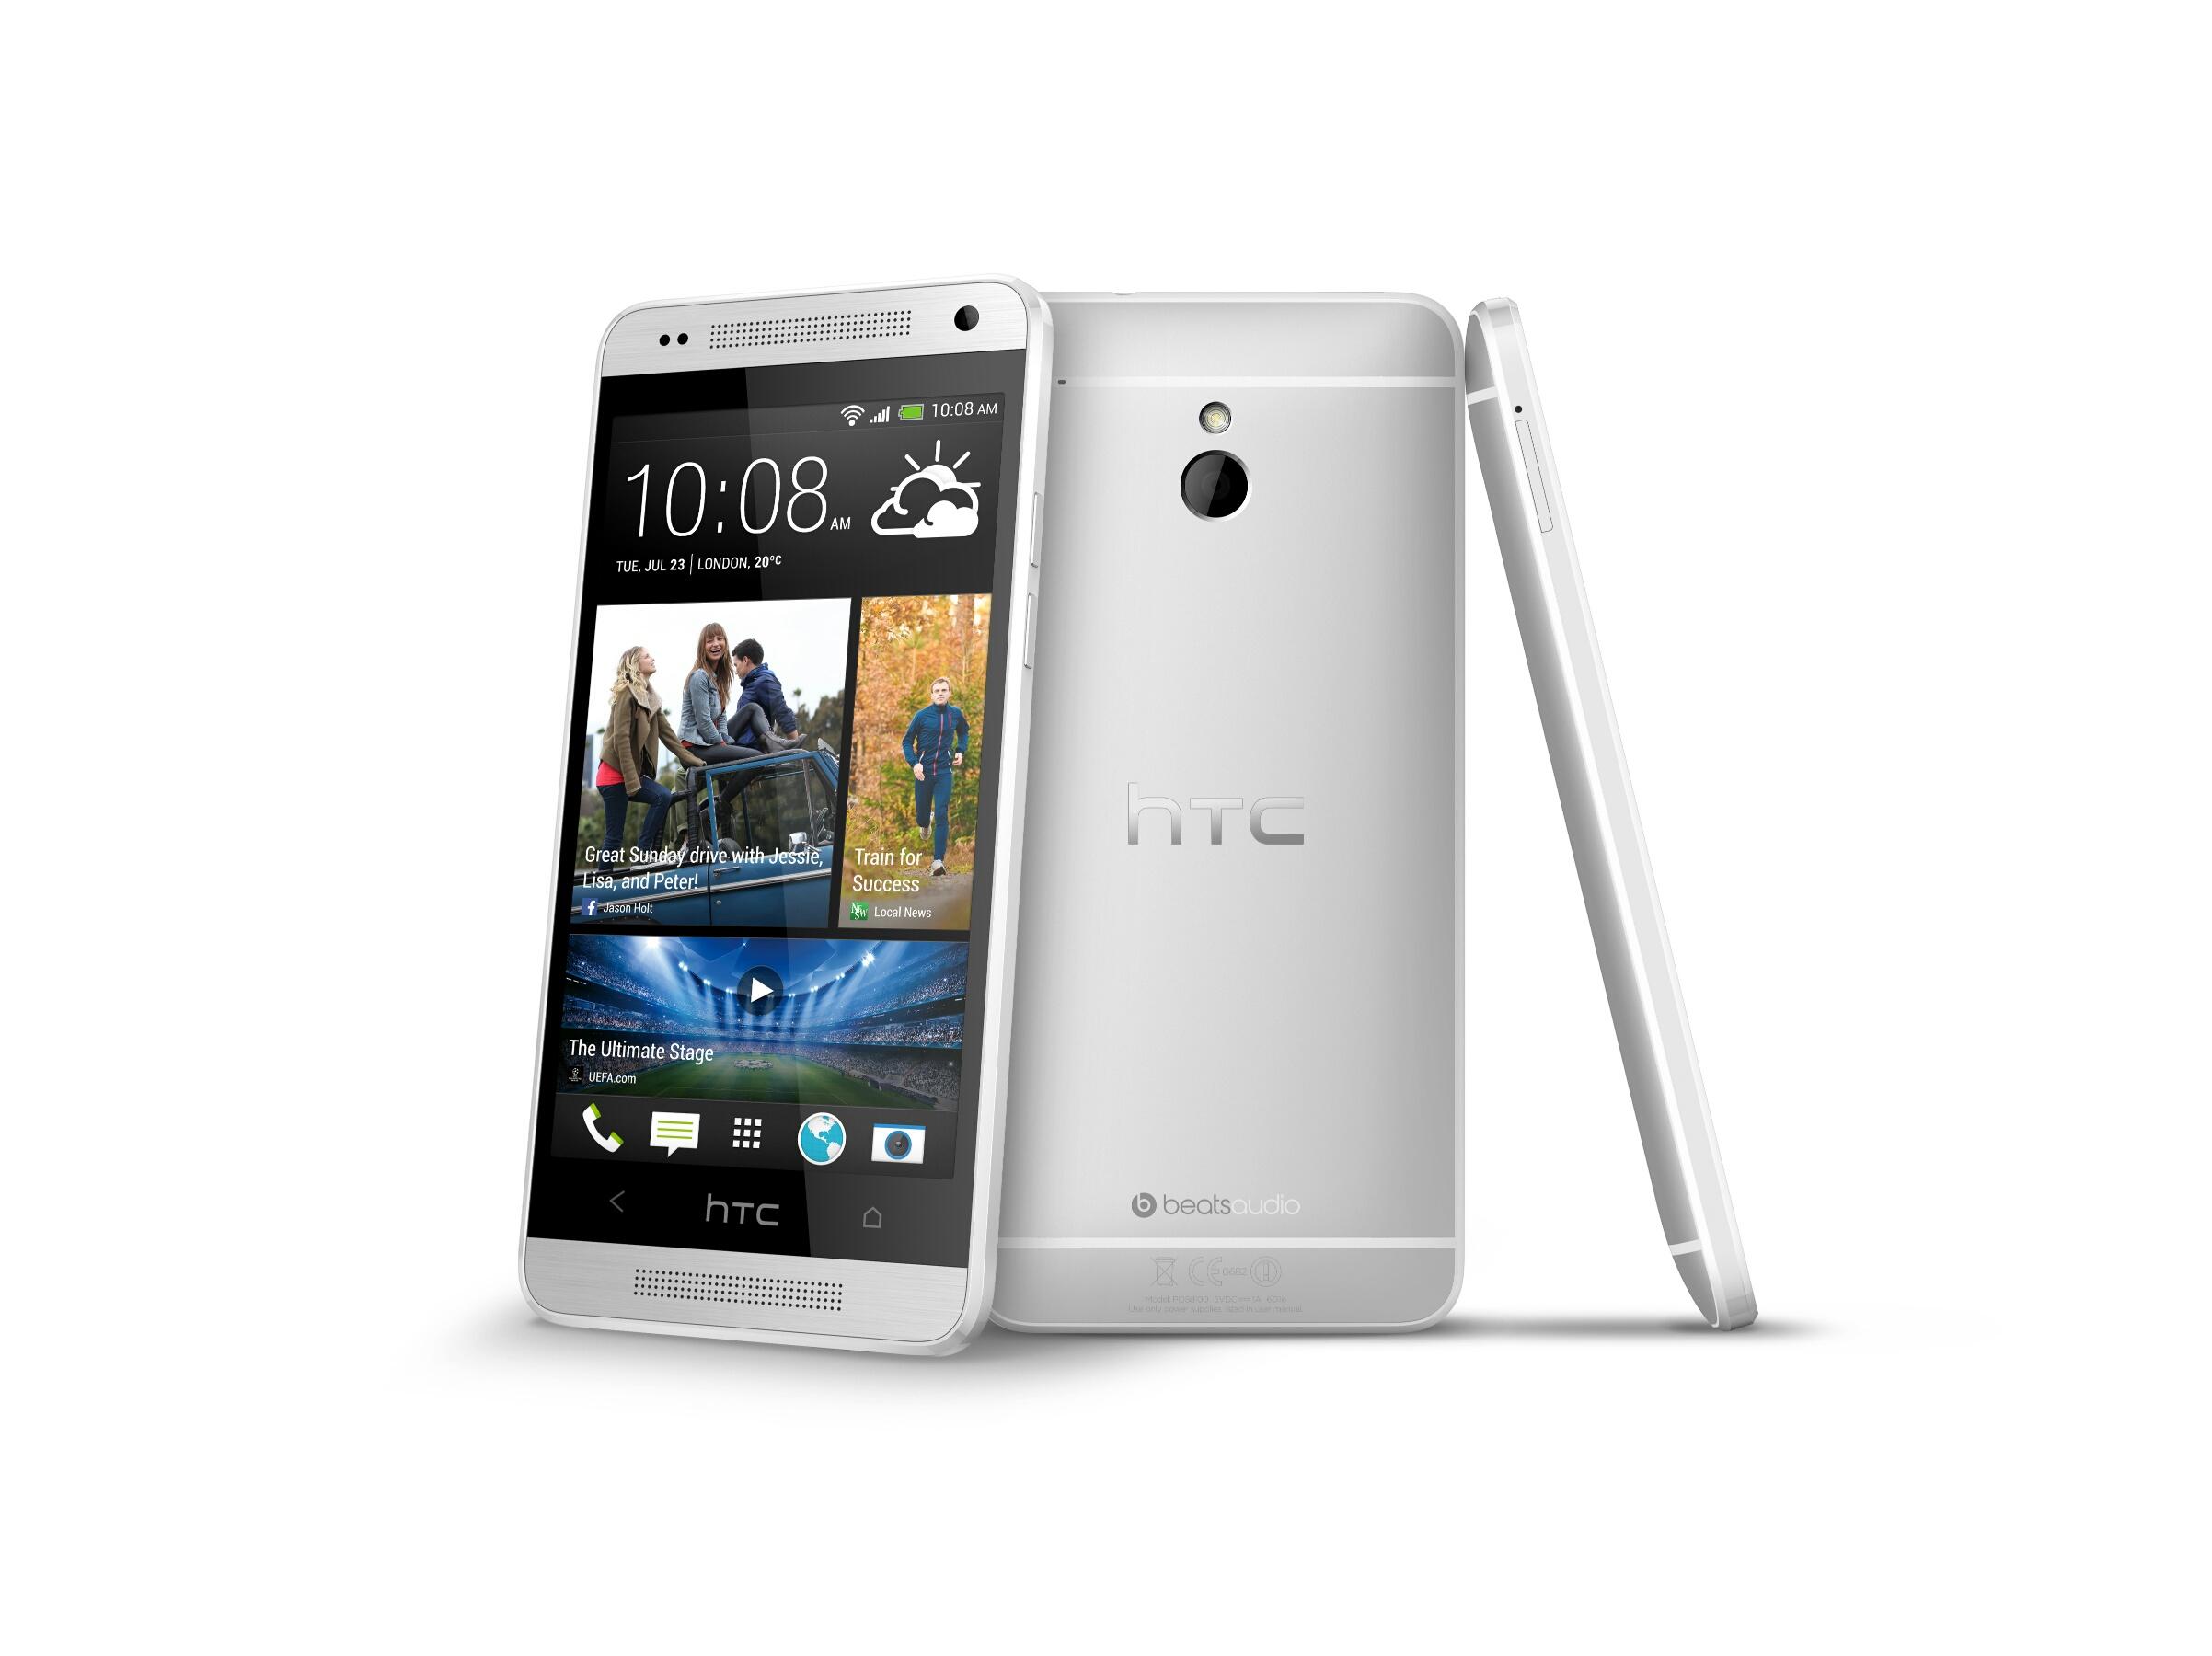 HTC One Minis 720p, 4.3 inch display.